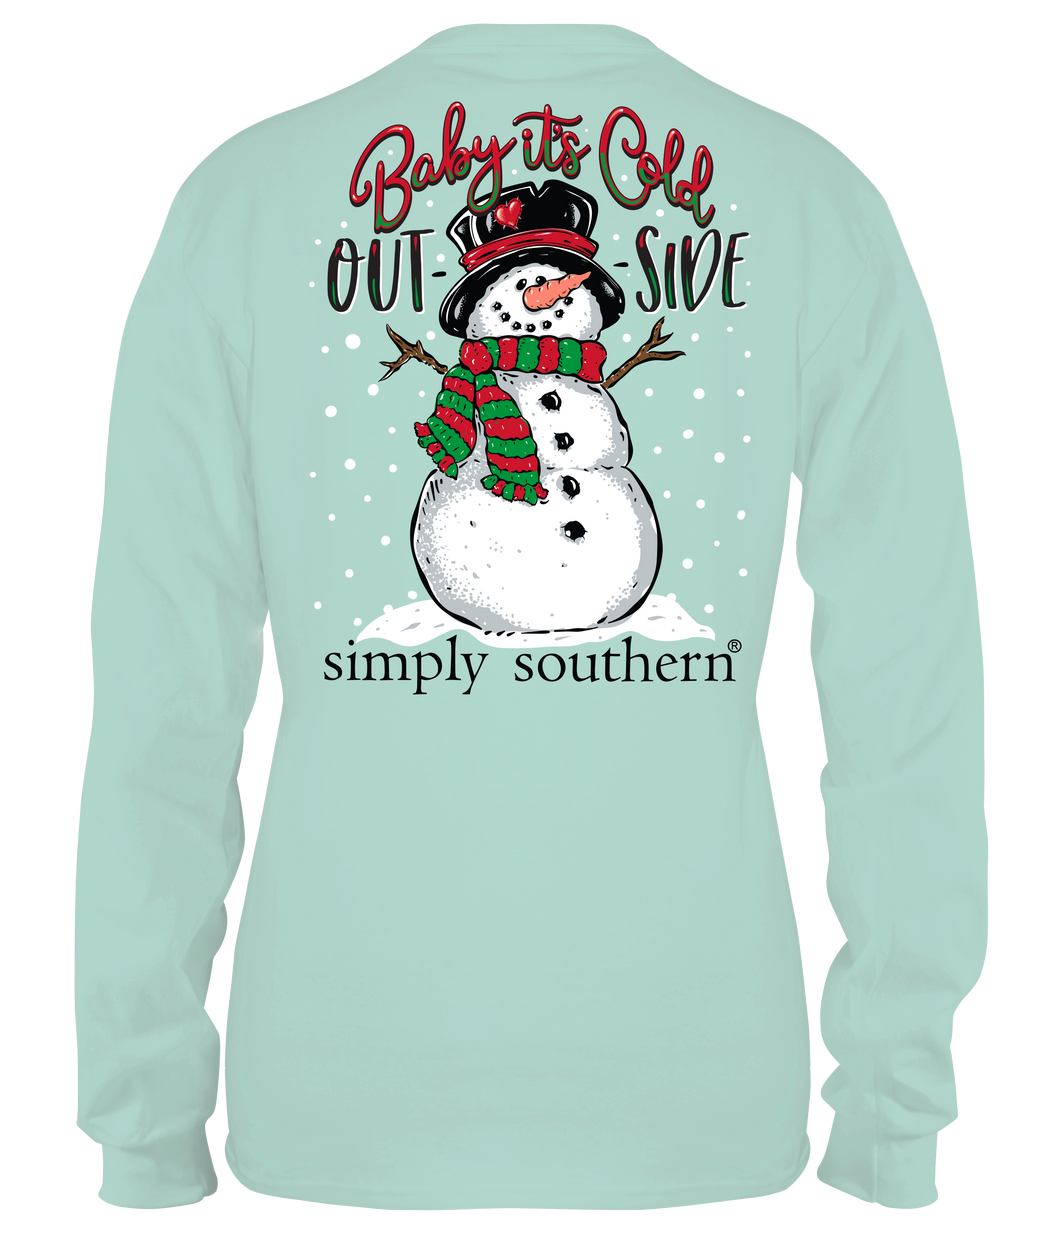 Simply Southern SNOWMAN BABY IT'S COLD OUT- SIDE Long Sleeve T-Shirt